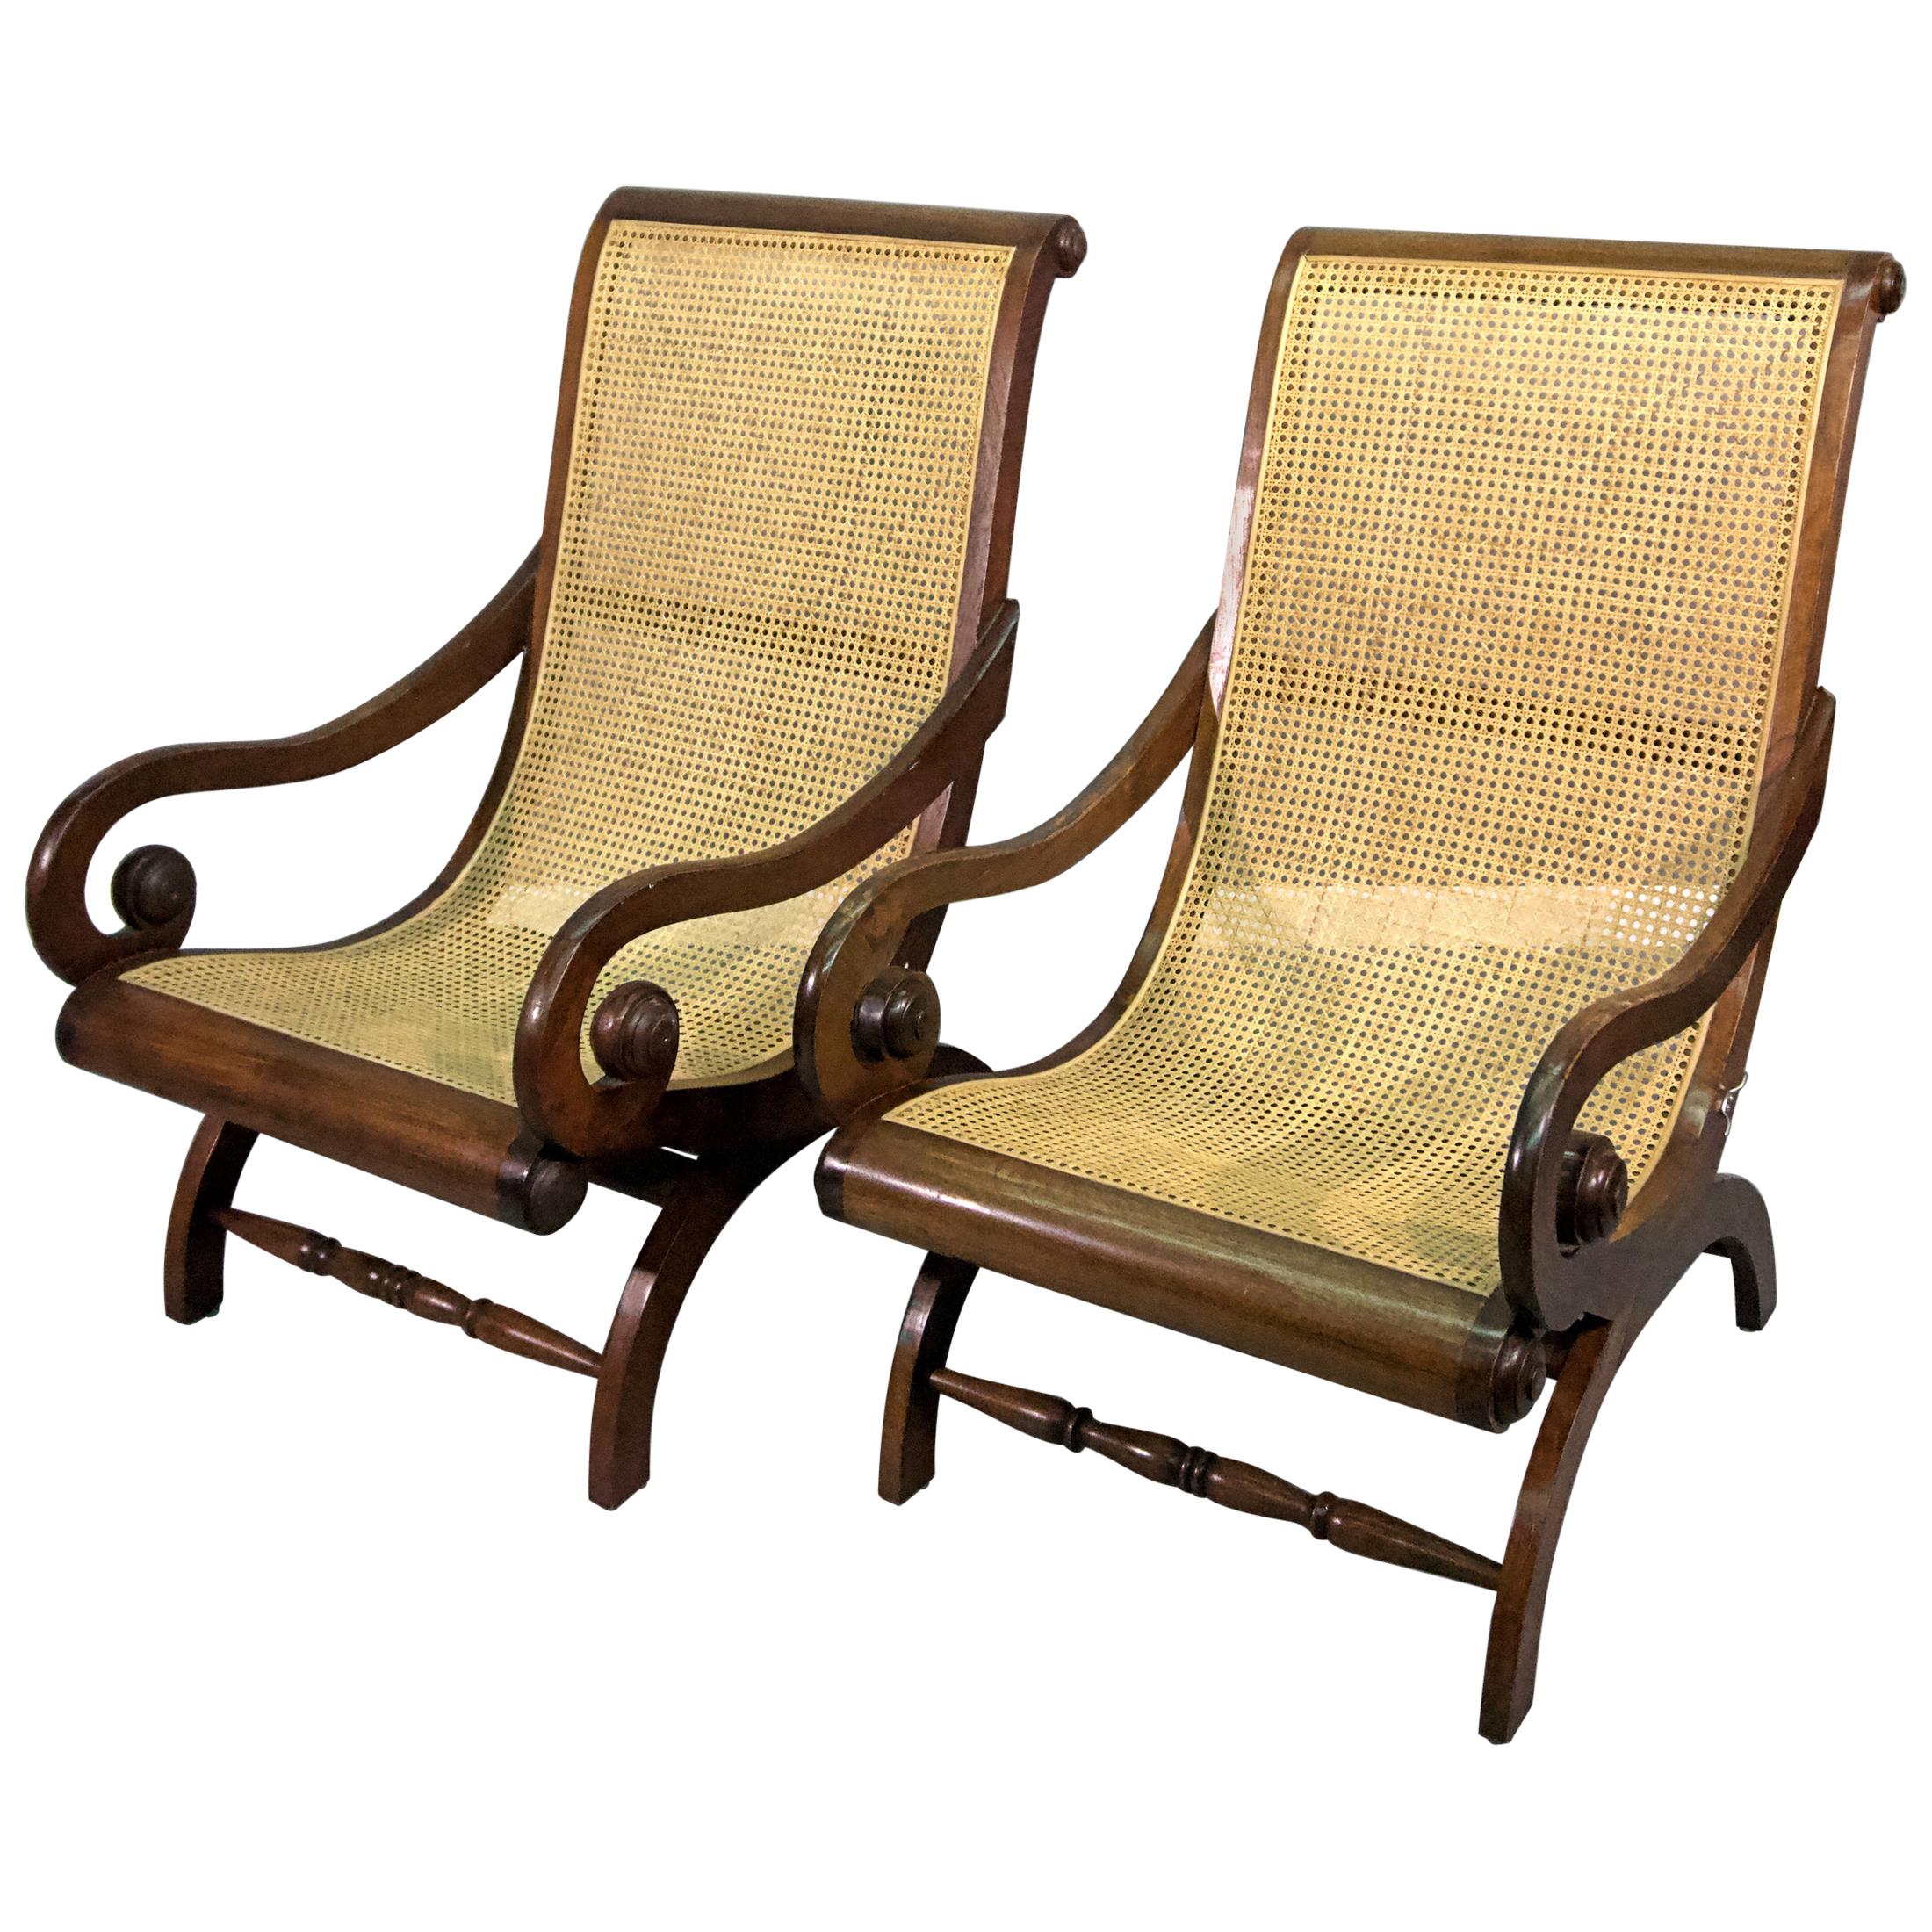 Pair of Anglo-Indian Teak Plantation Chairs